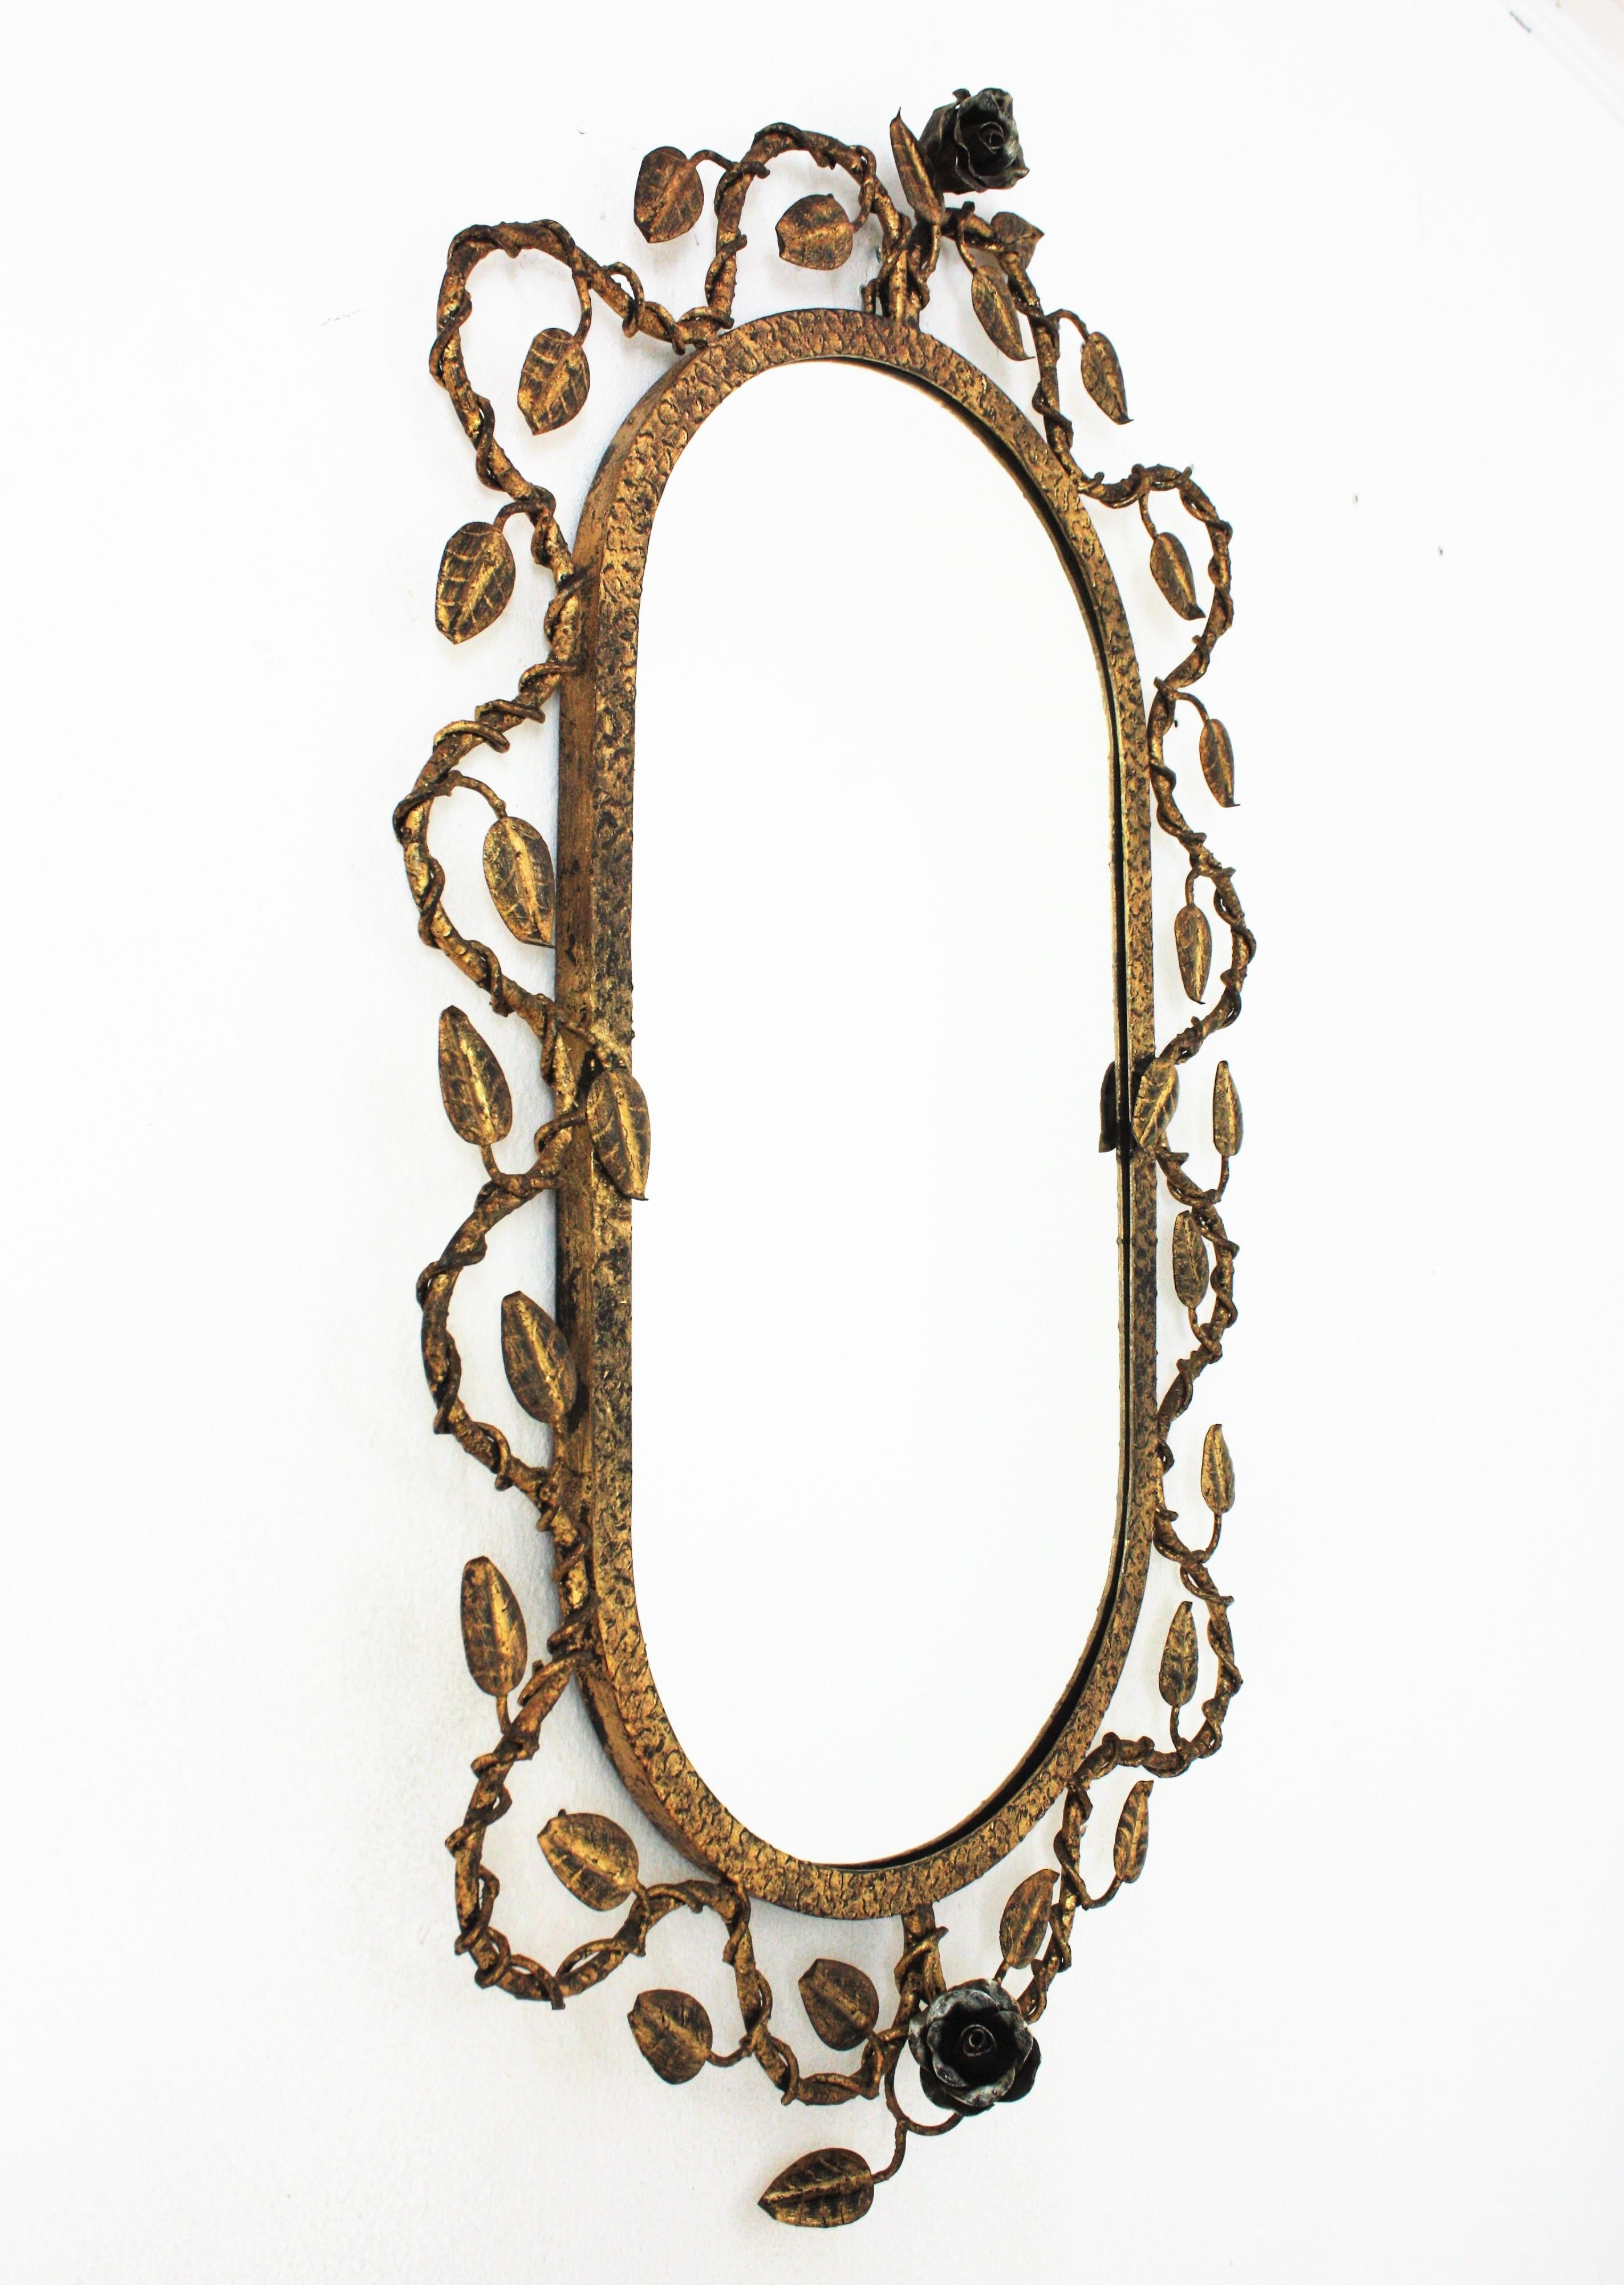 Hand-Crafted Oval Mirror in Gilt Iron with Foliage Floral Motifs